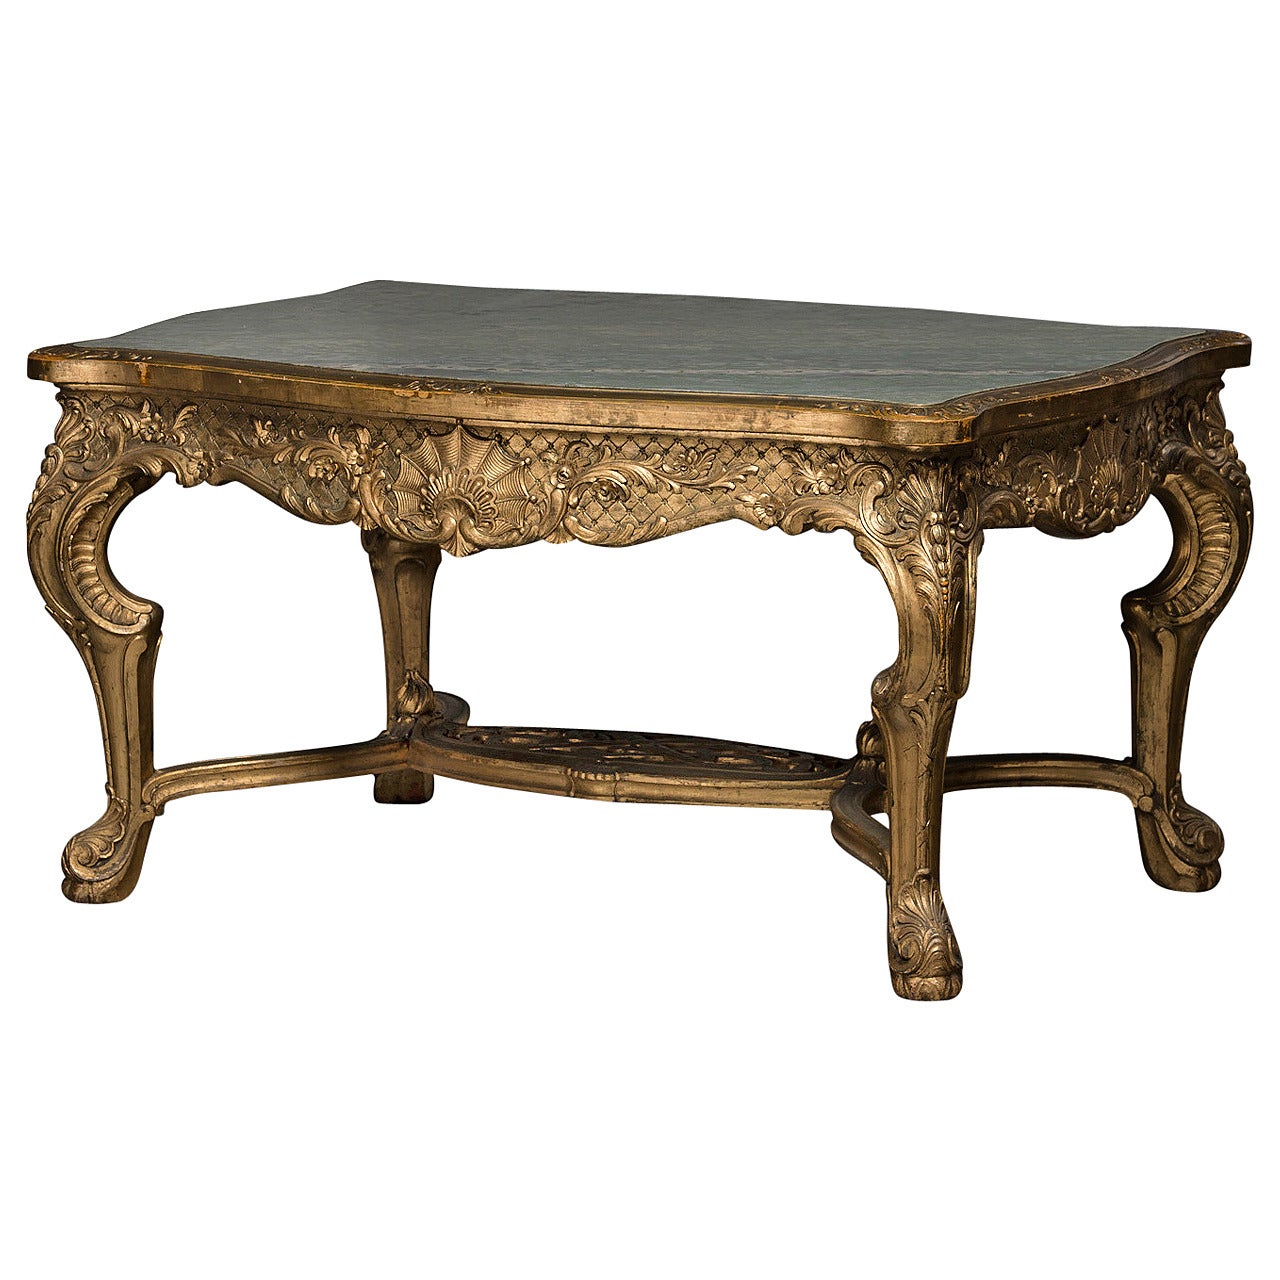 Rare Salon Table with Royal Provinces from Fredensborg Palace Denmark, 1890